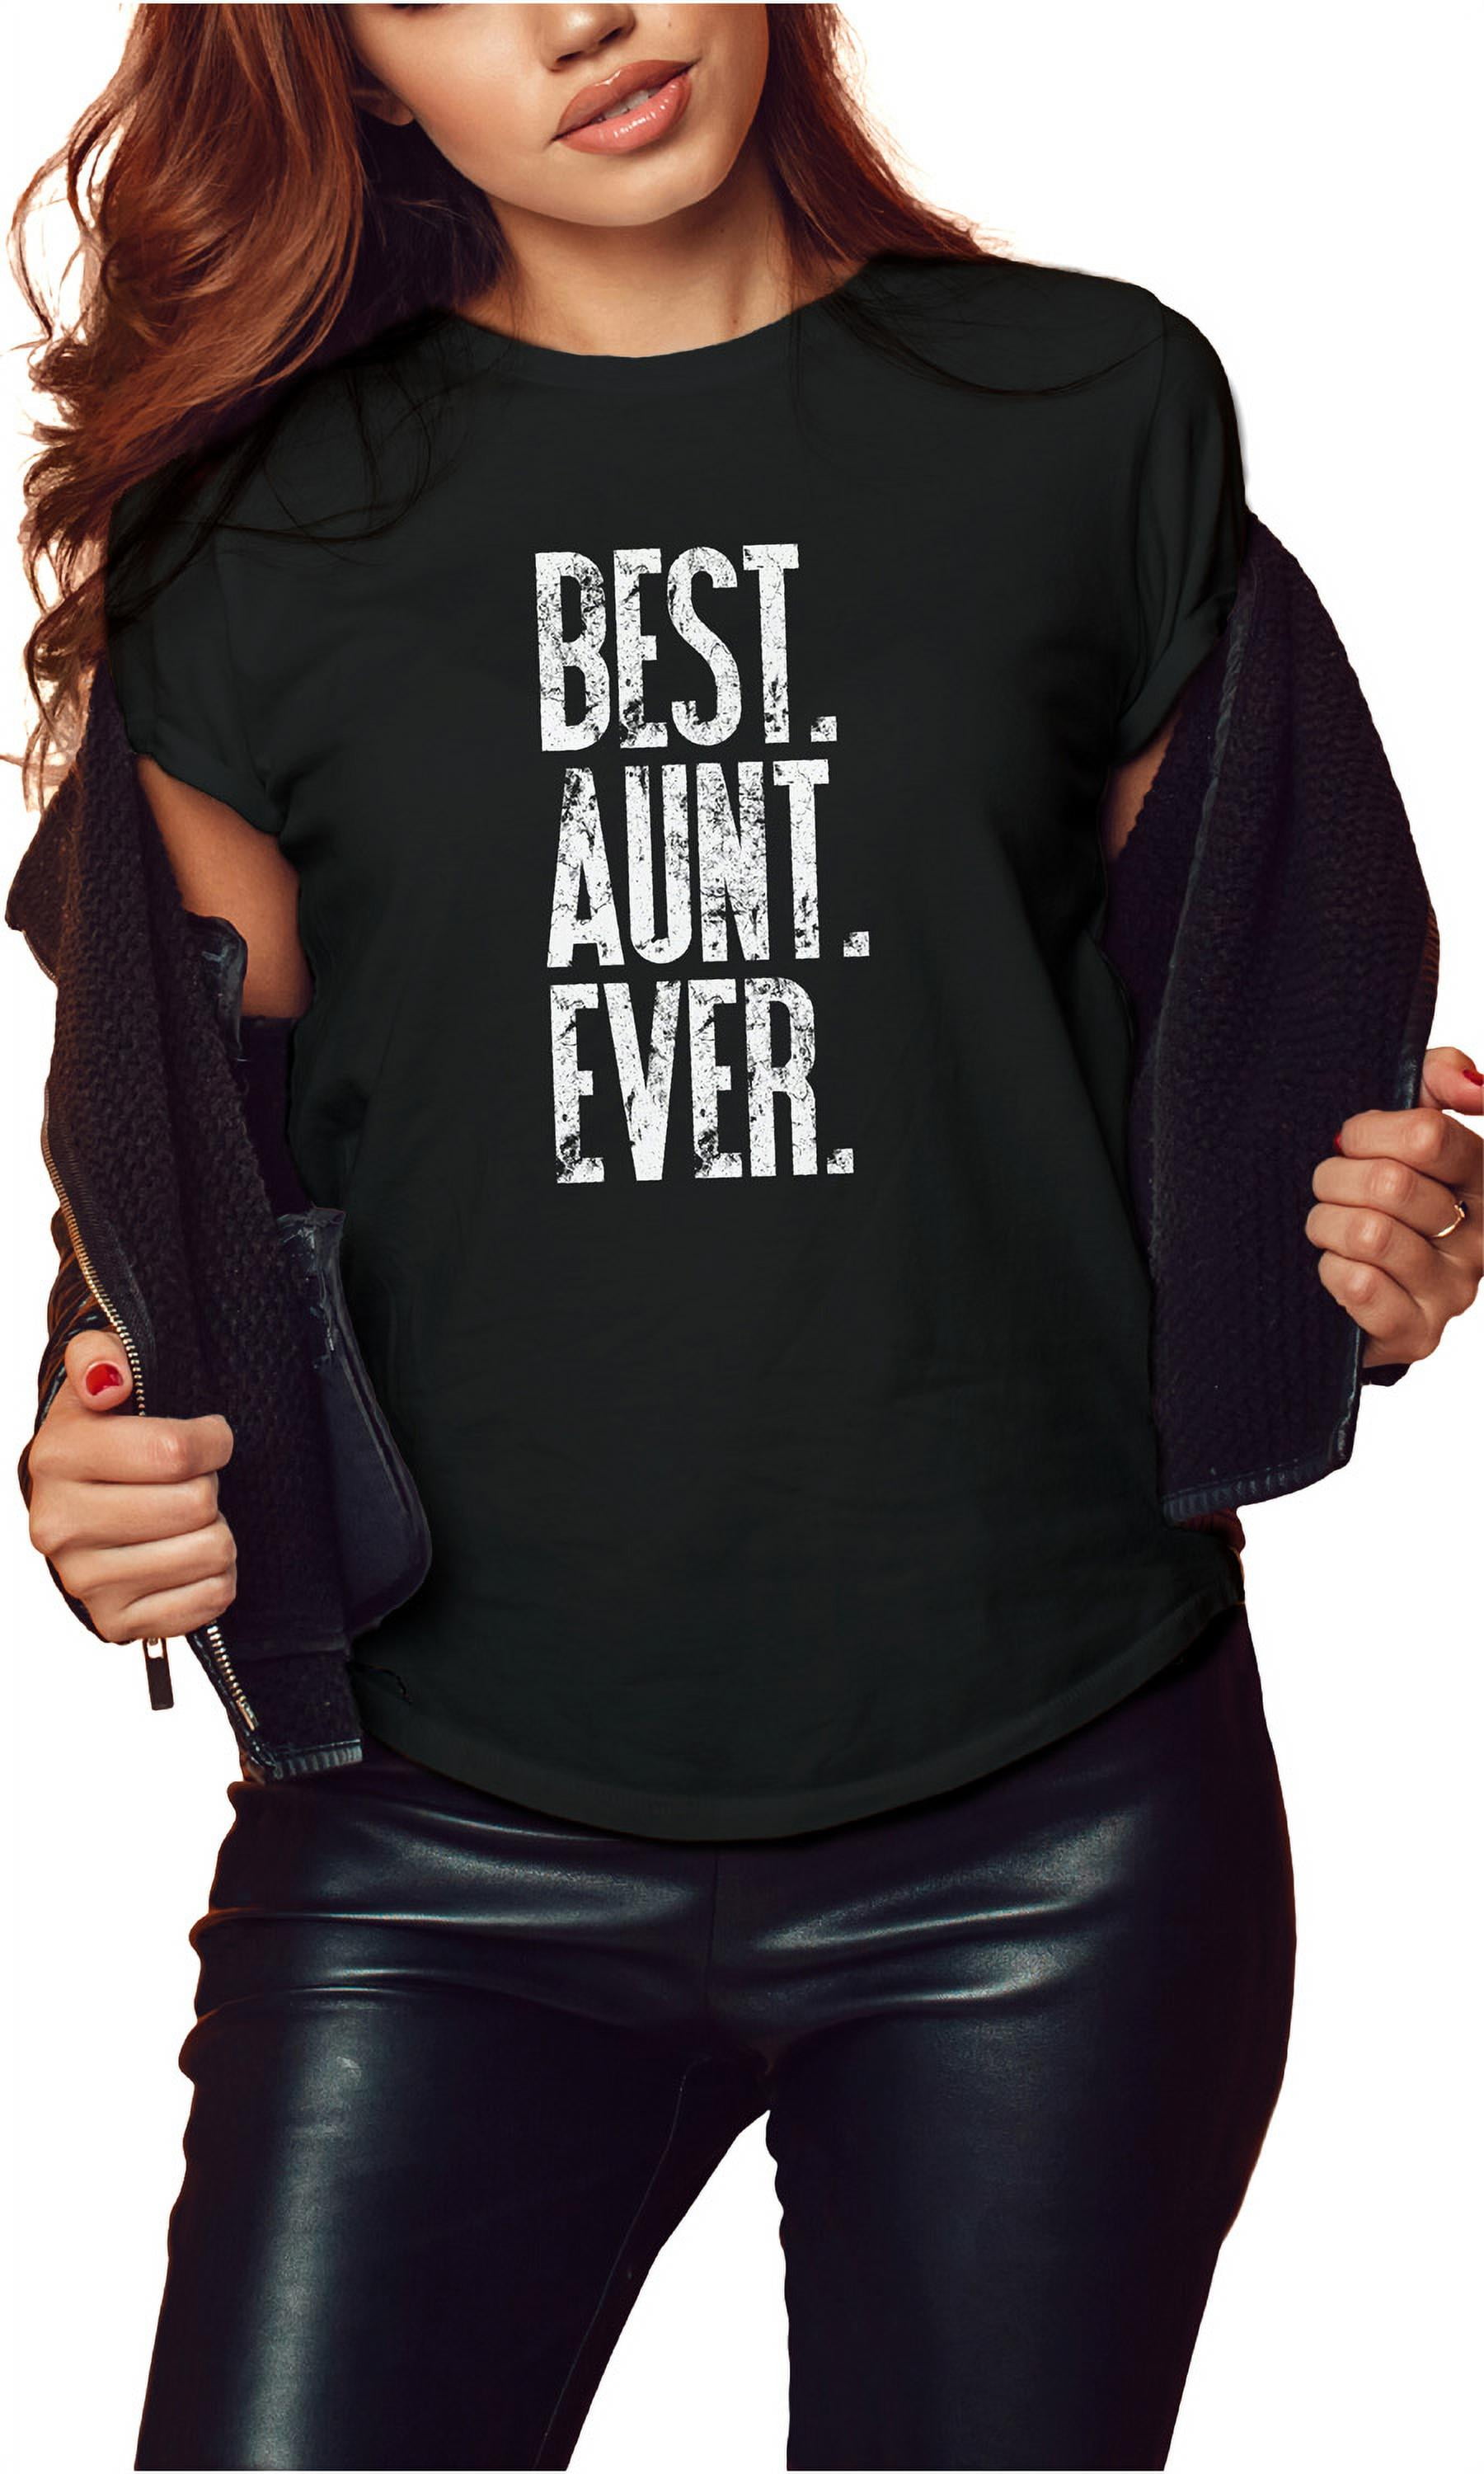 BEST AUNT EVER Shirt for Aunt Short-Sleeve Unisex T-Shirt Best Aunt Ever Tshirt Gift for Aunt for Mother's Day